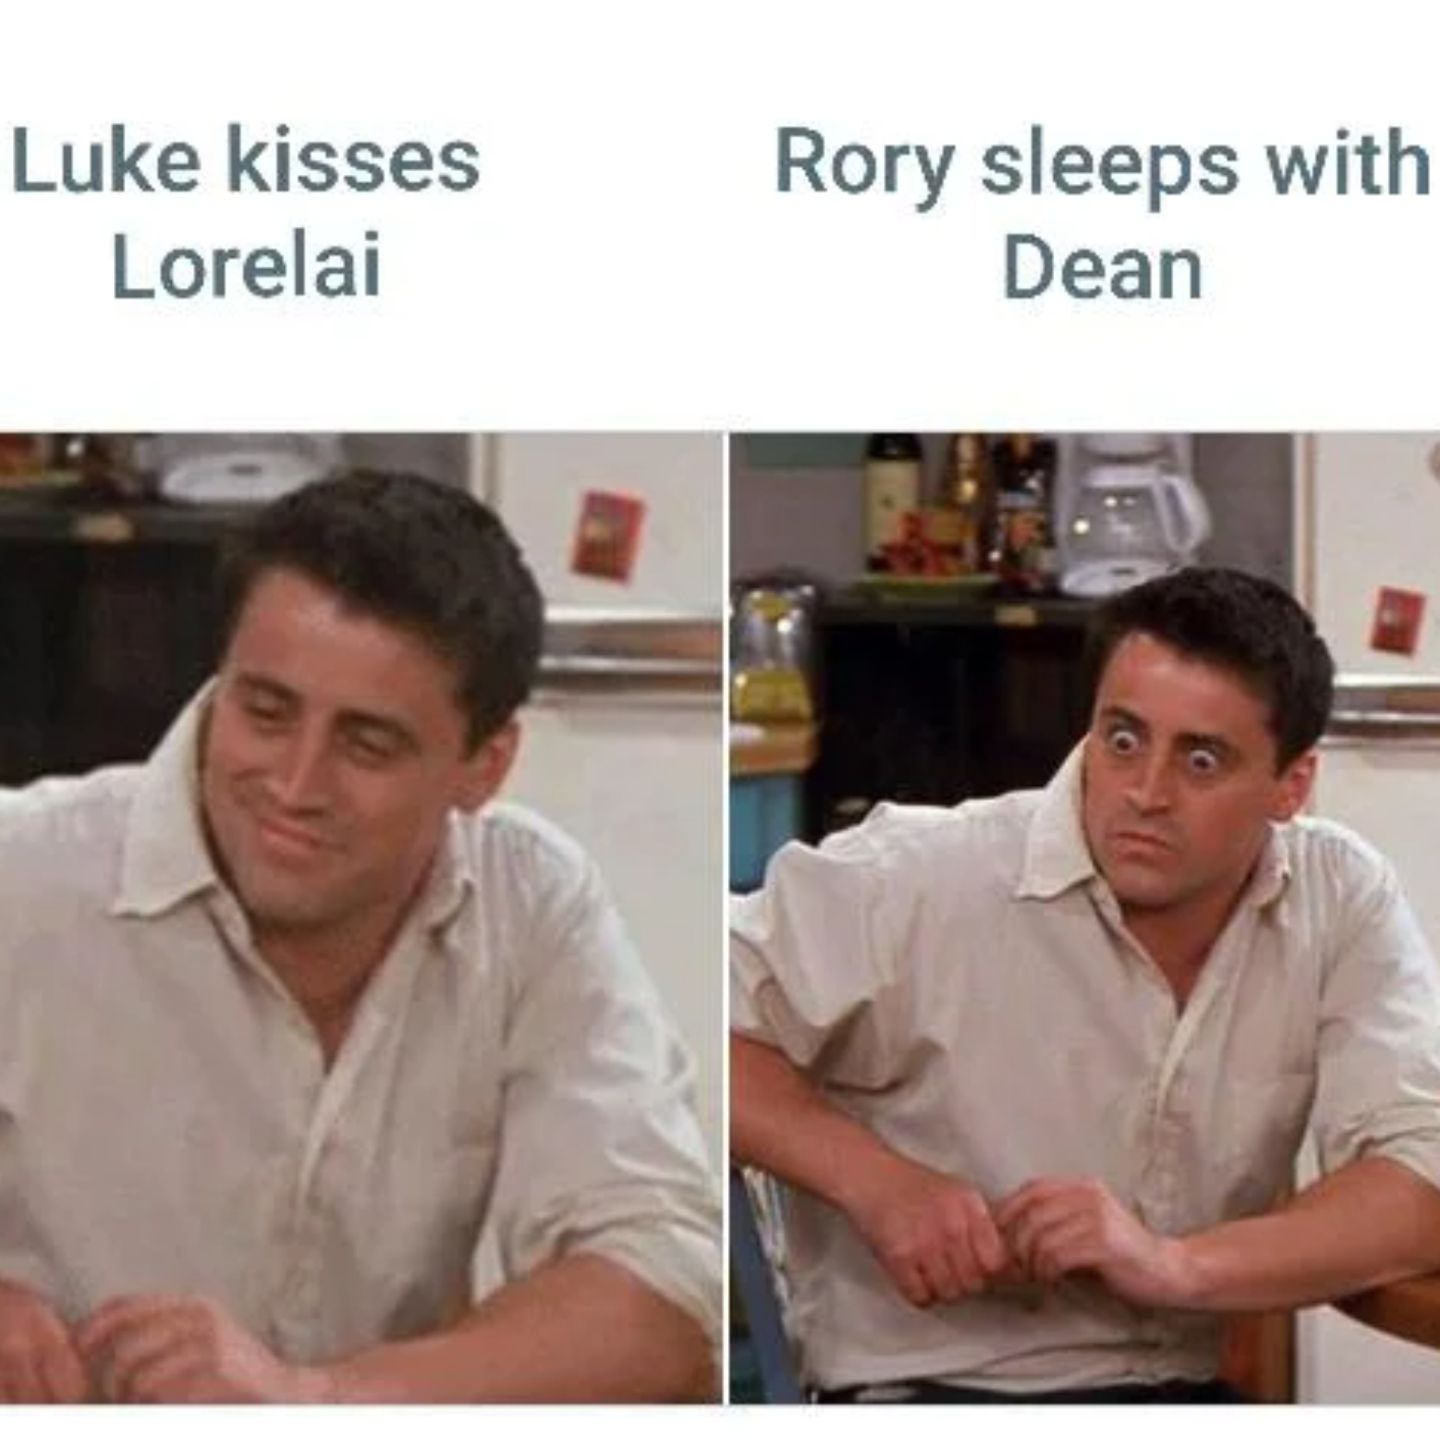 Meme about the Gilmore Girls episode when Luke and Lorelei kiss and Rory has an affair with a married Dean.